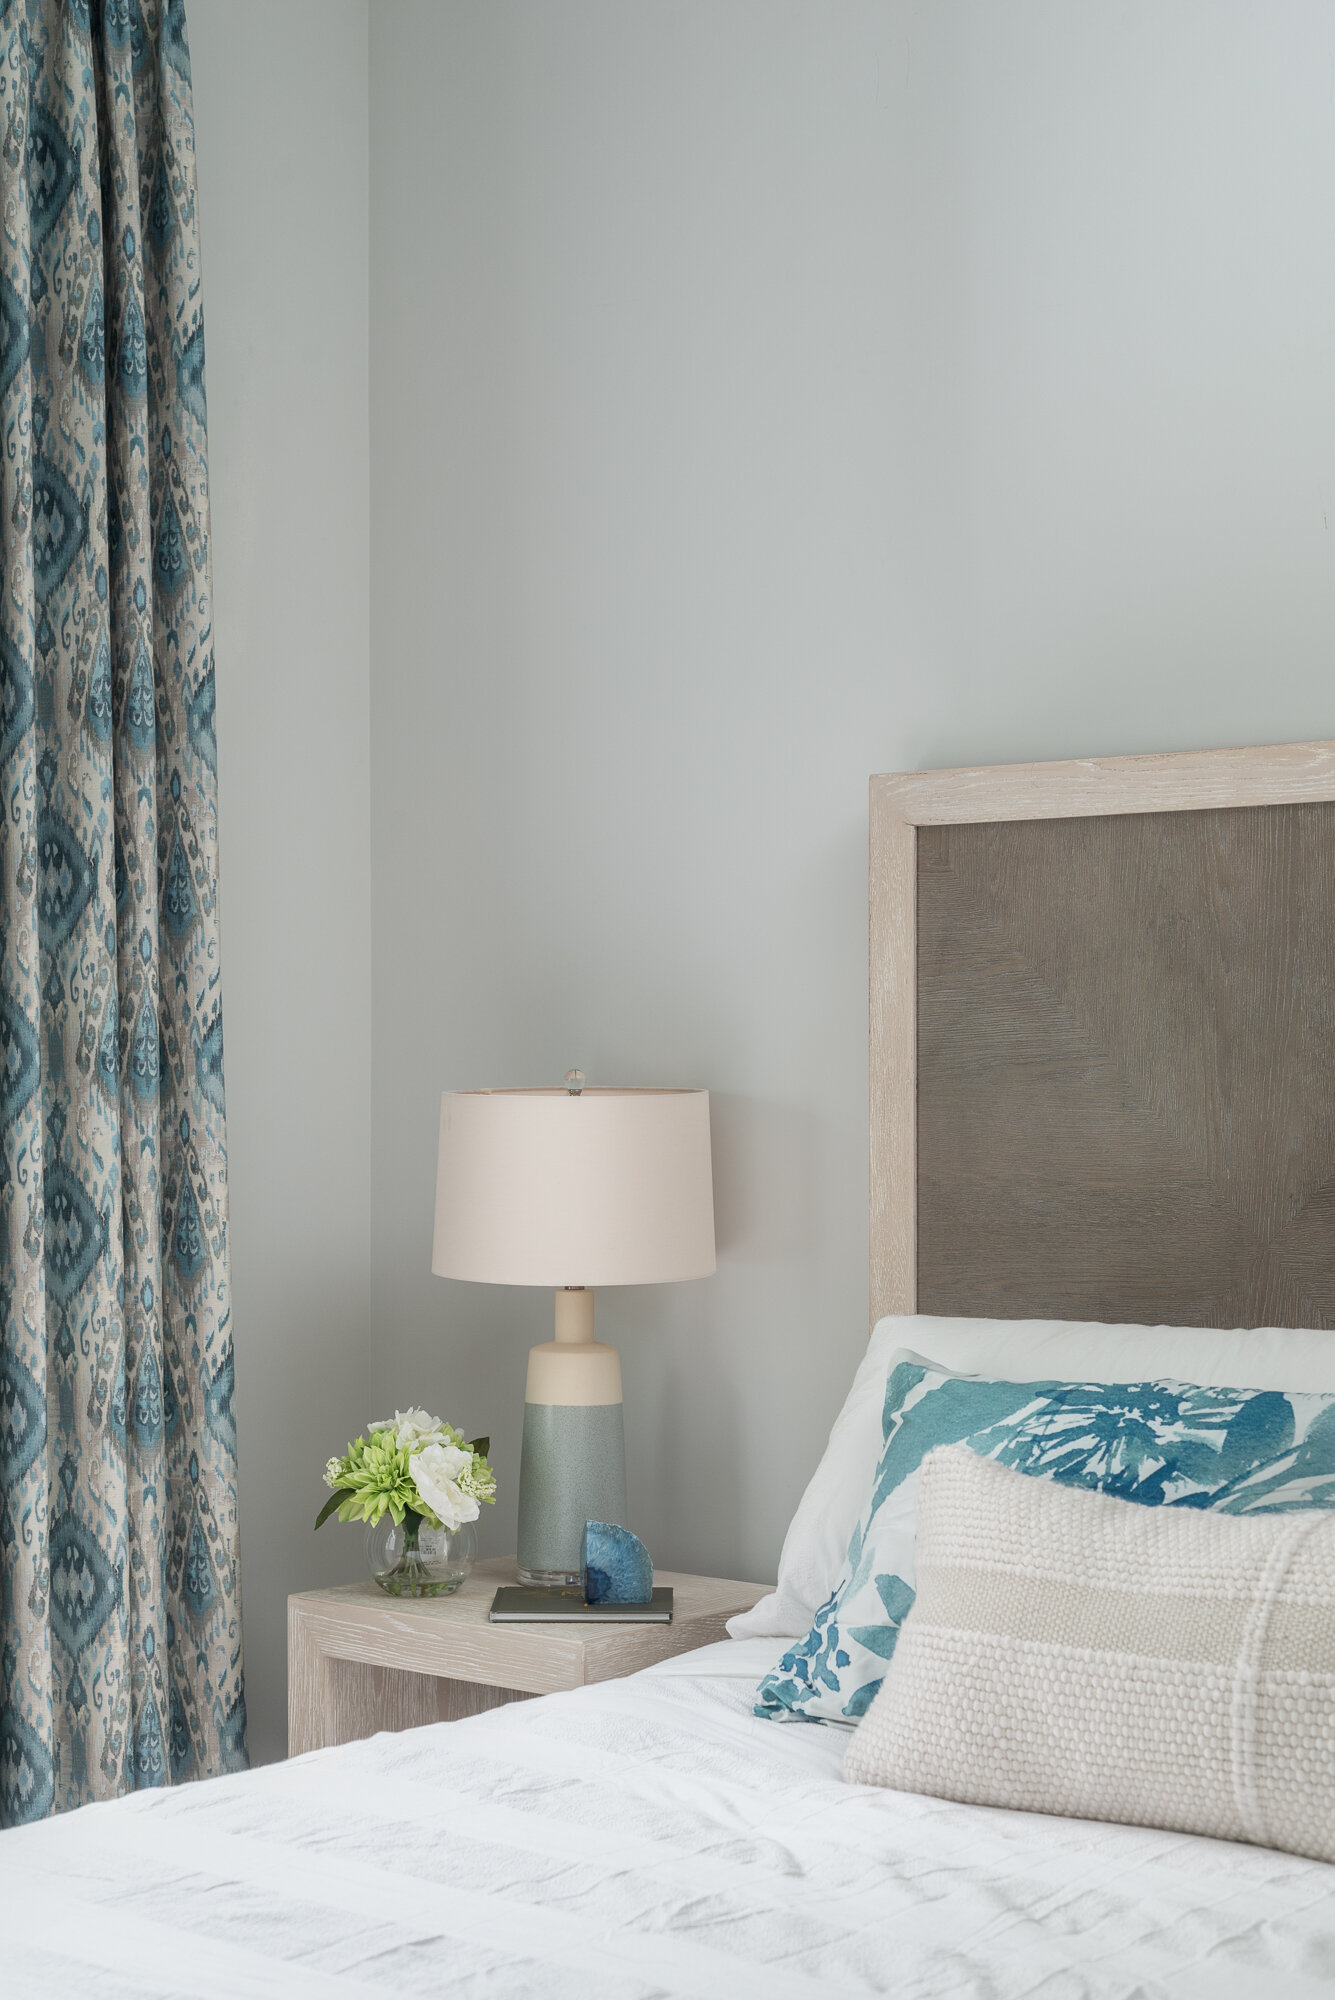 Bedroom light blue and grey with blue pattern curtains